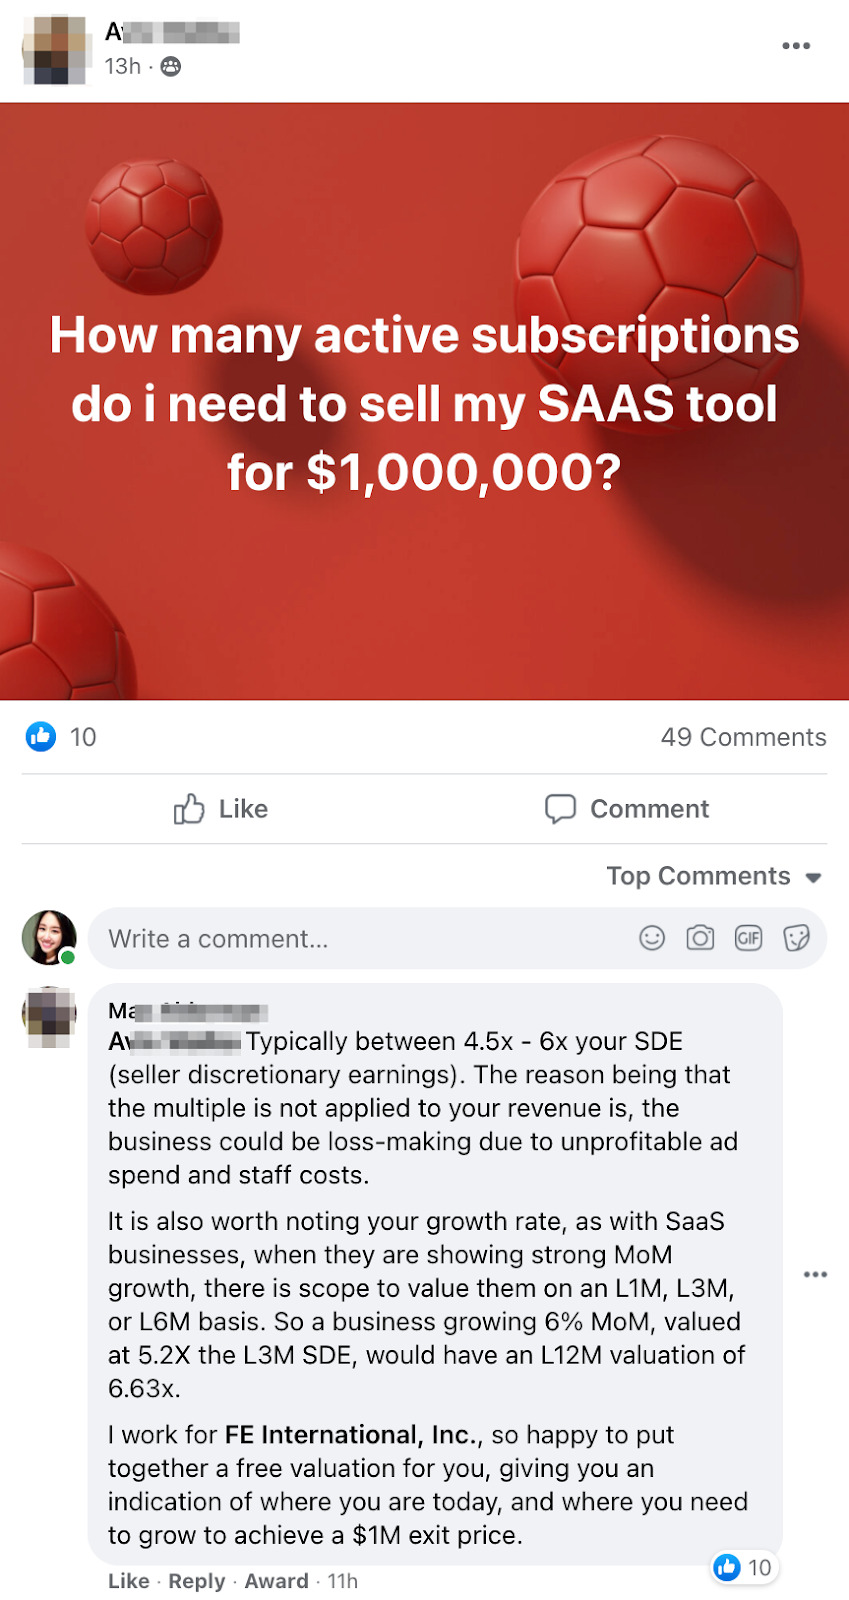 Group member's FB post asking how many subscriptions are required to sell their SaaS tool for $1 million